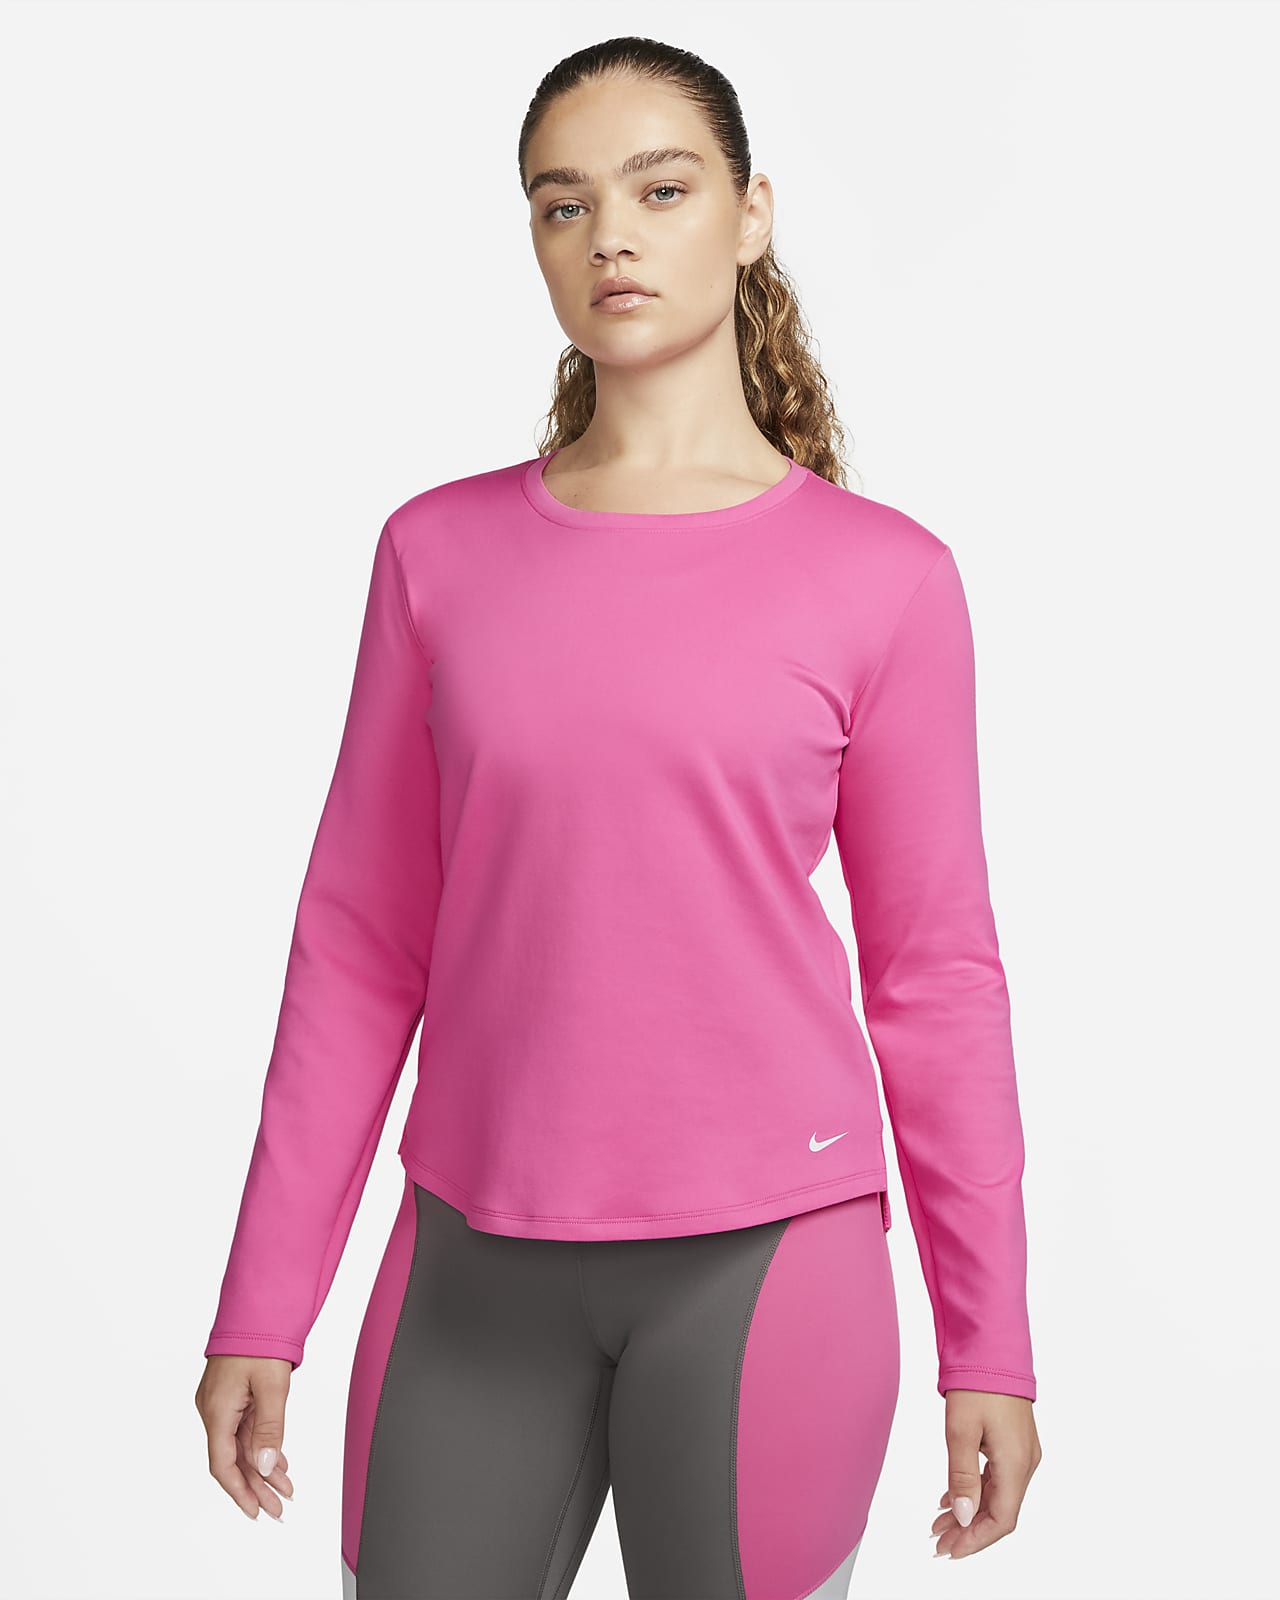 Unirse Resentimiento obra maestra Nike Therma-FIT One Women's Long-Sleeve Top. Nike.com